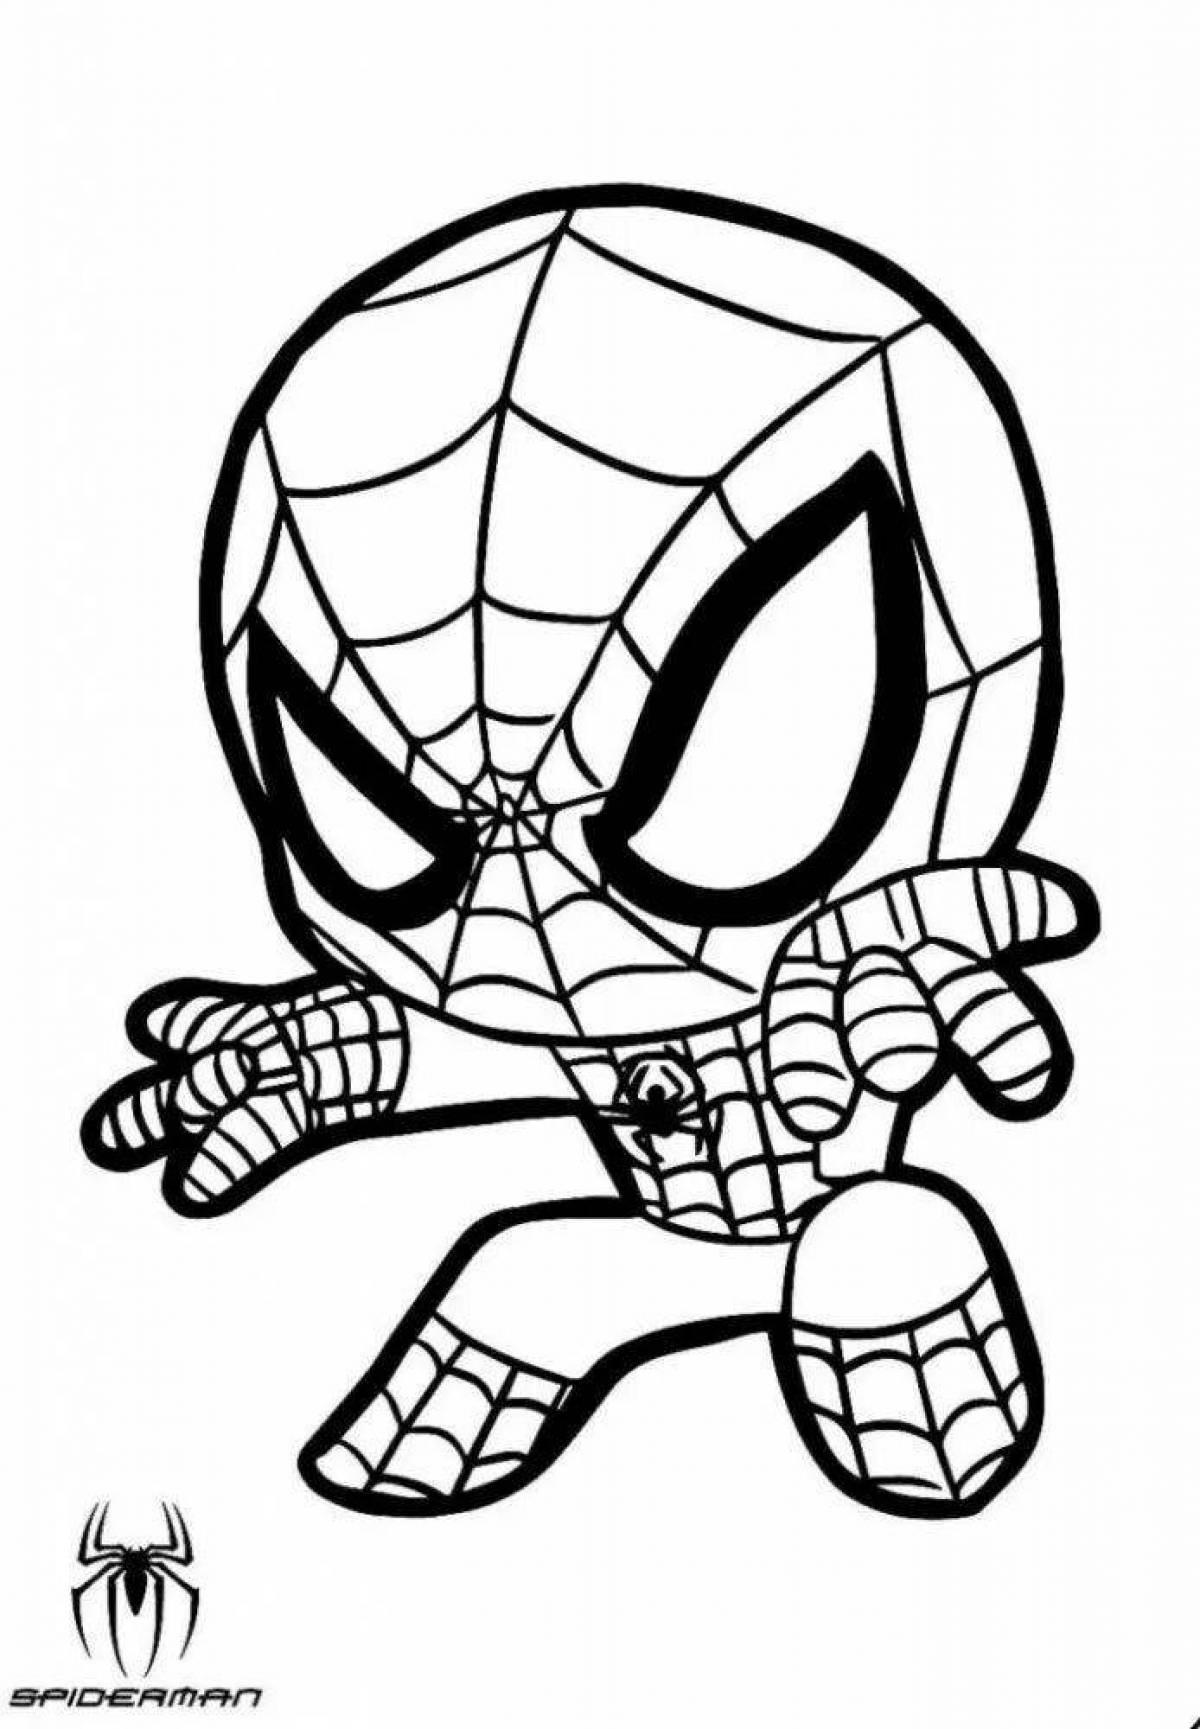 Flawless Spiderman with shield coloring book